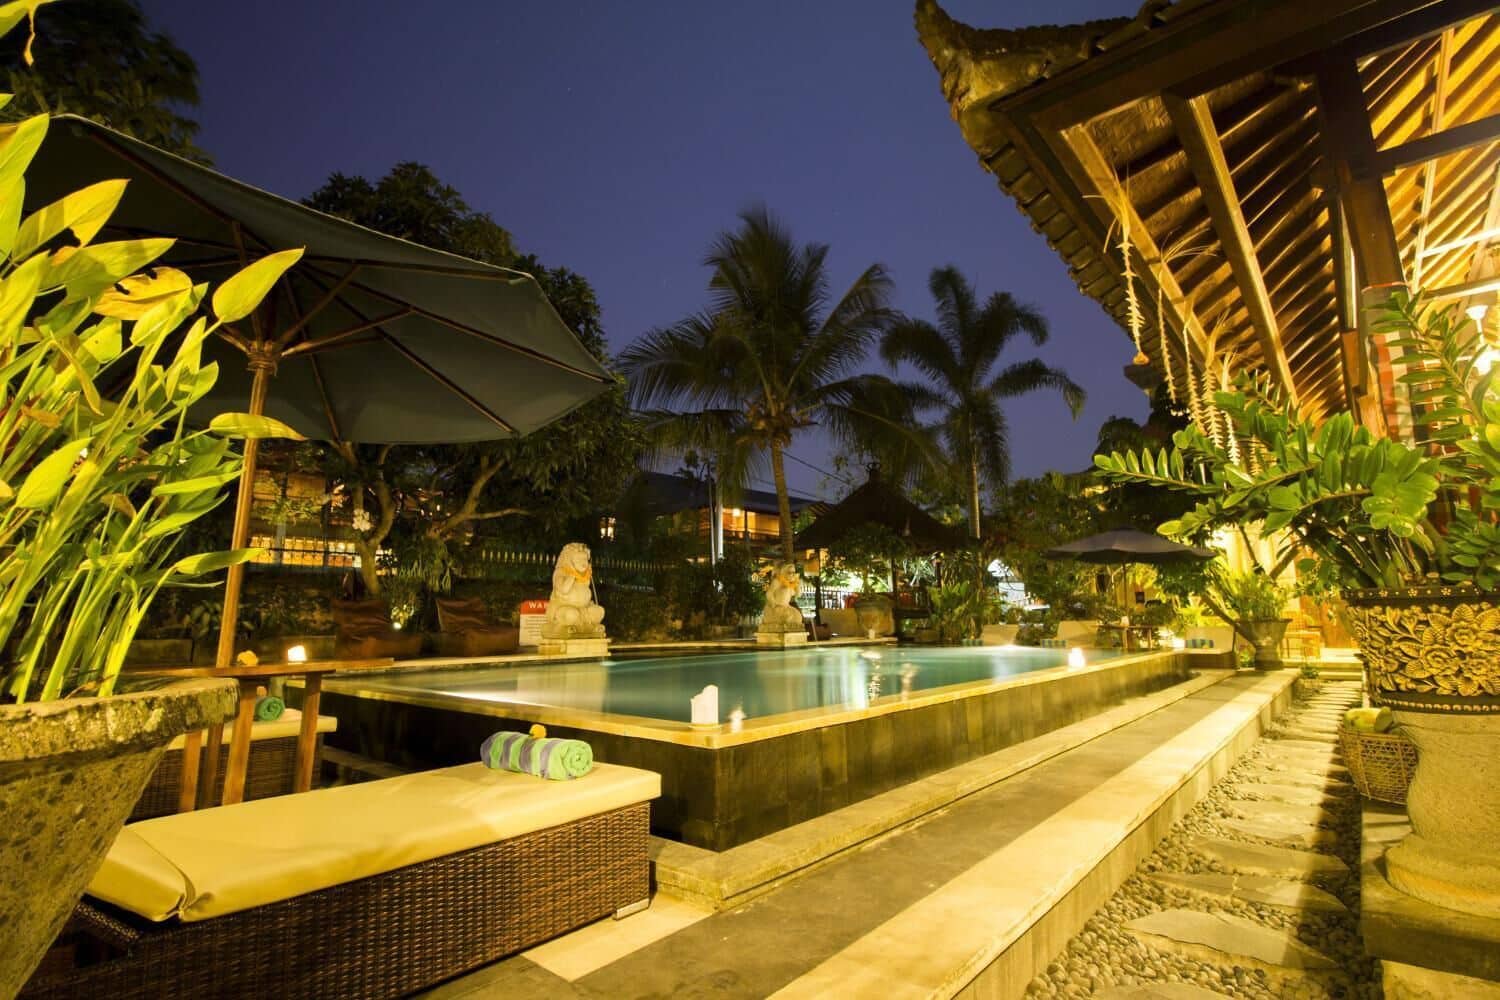 A night time at the Ubud Aura Retreat Center in Bali where guests can relax b y the pool and enjoy serenity away from their daily lives.